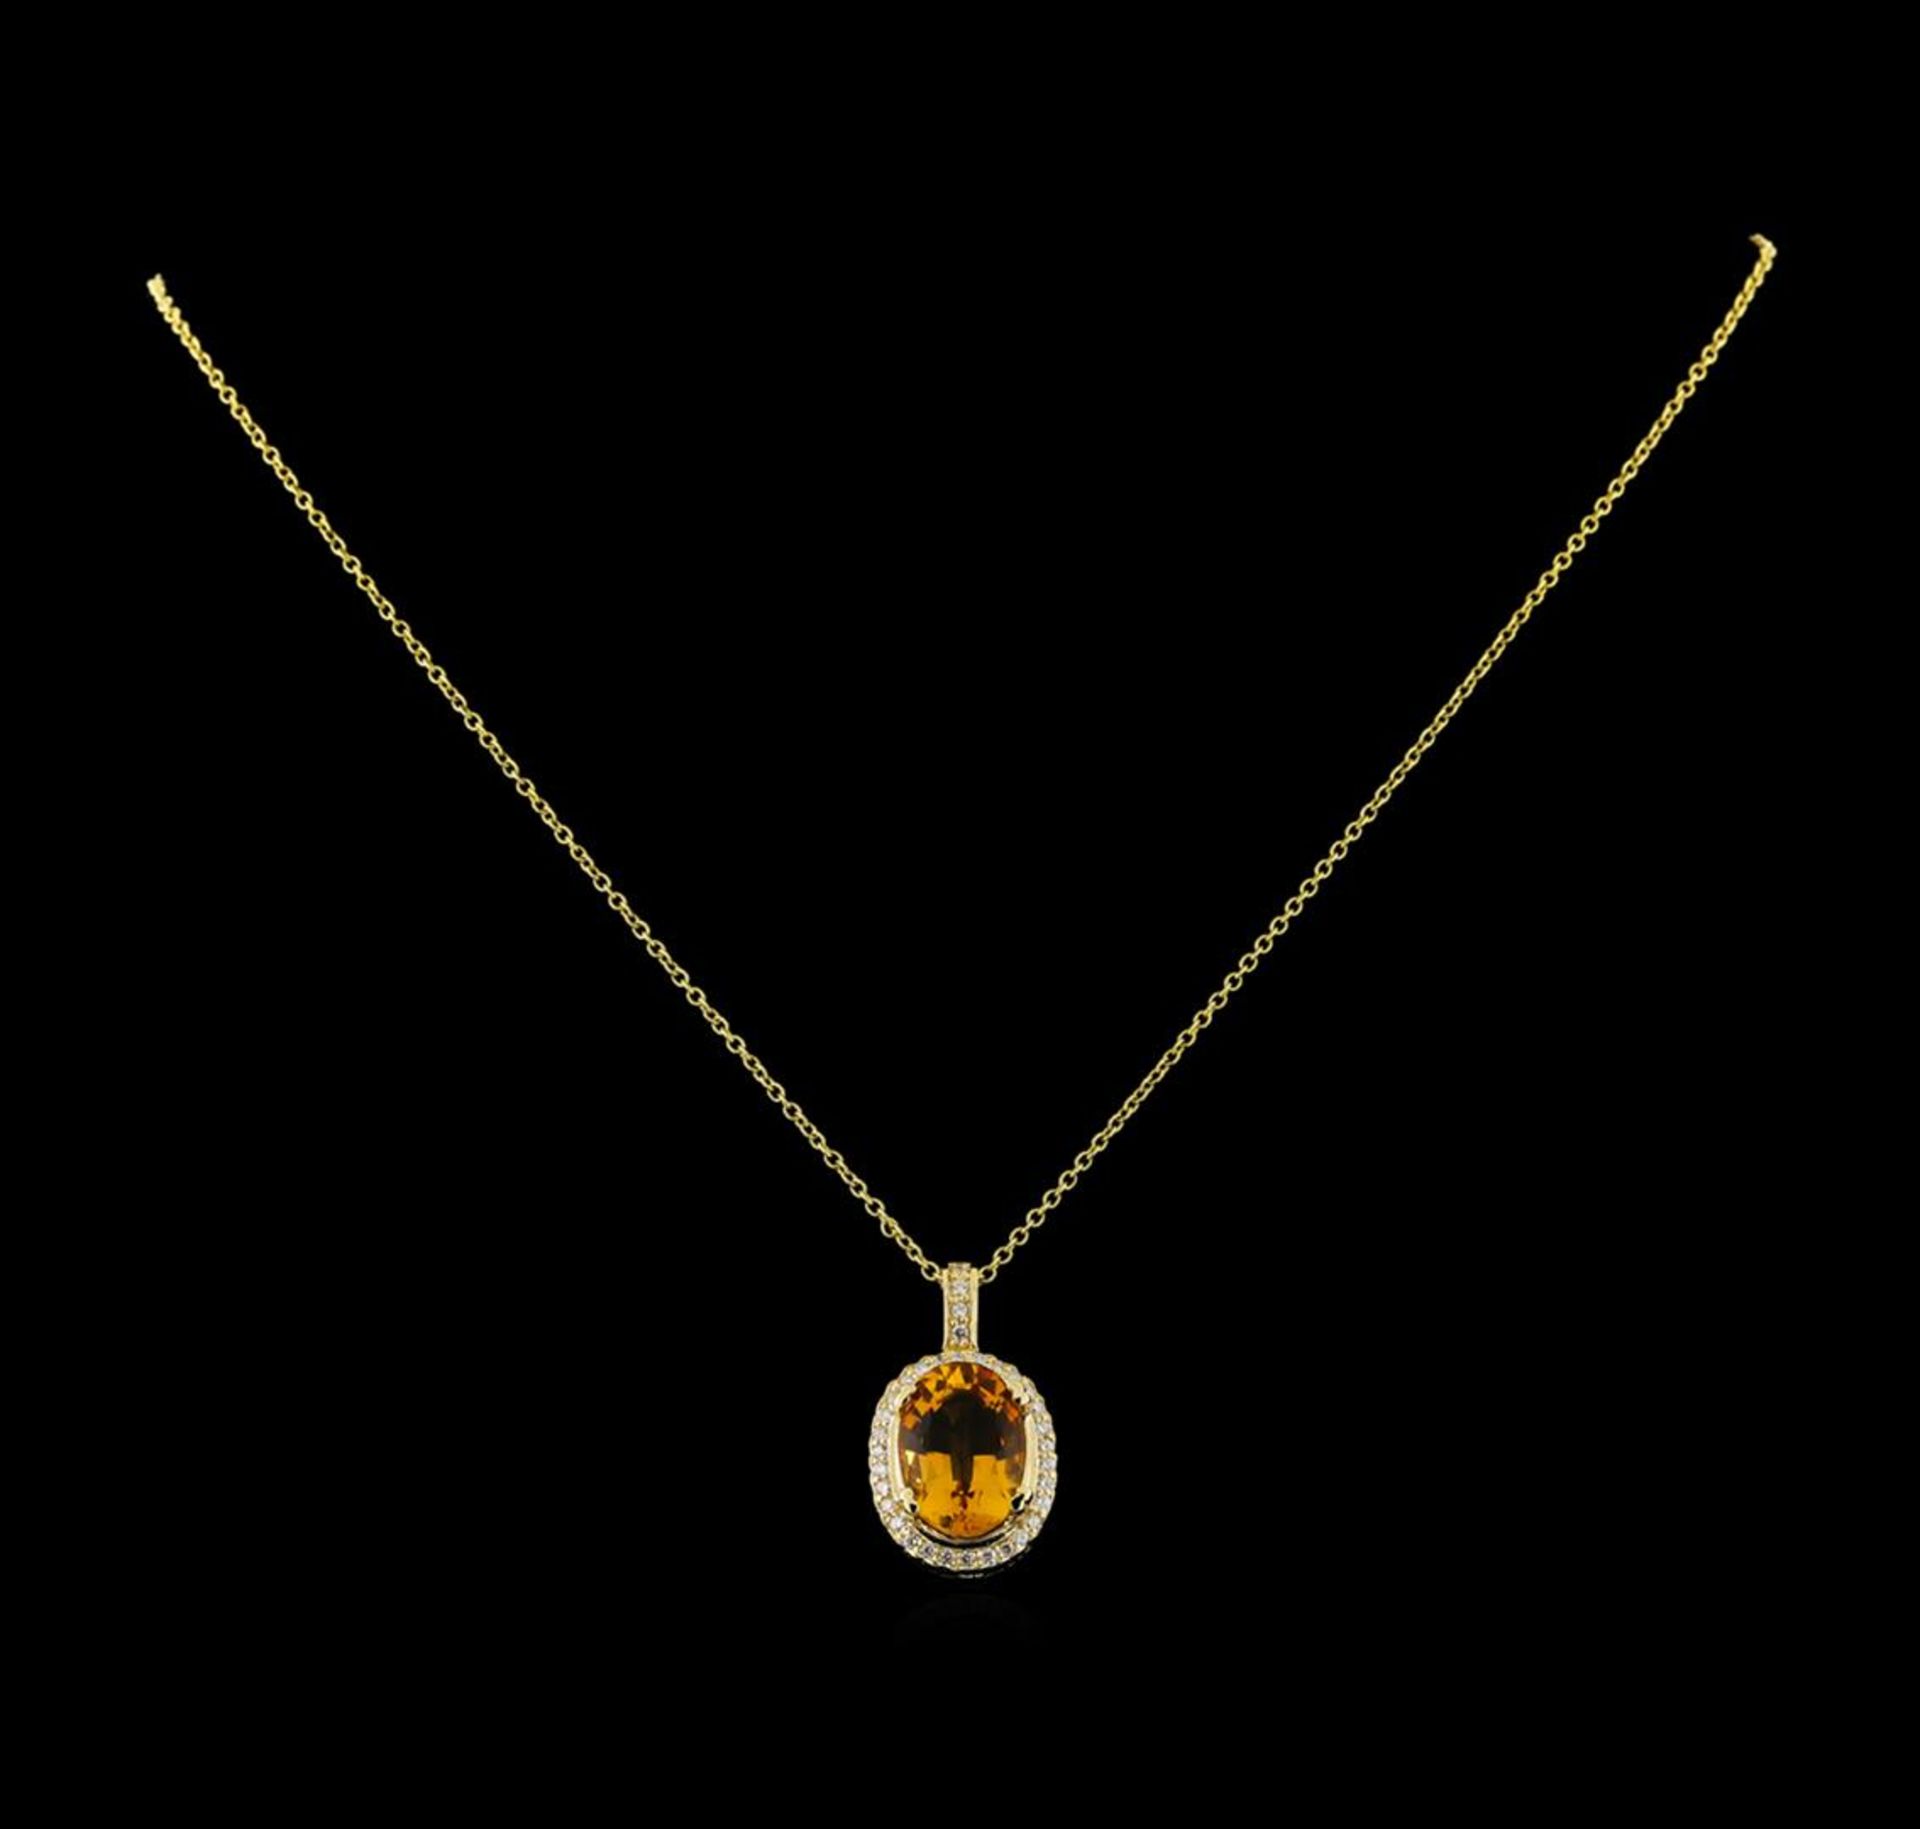 5.45 ctw Citrine and Diamond Pendant With Chain - 14KT Yellow Gold - Image 2 of 2